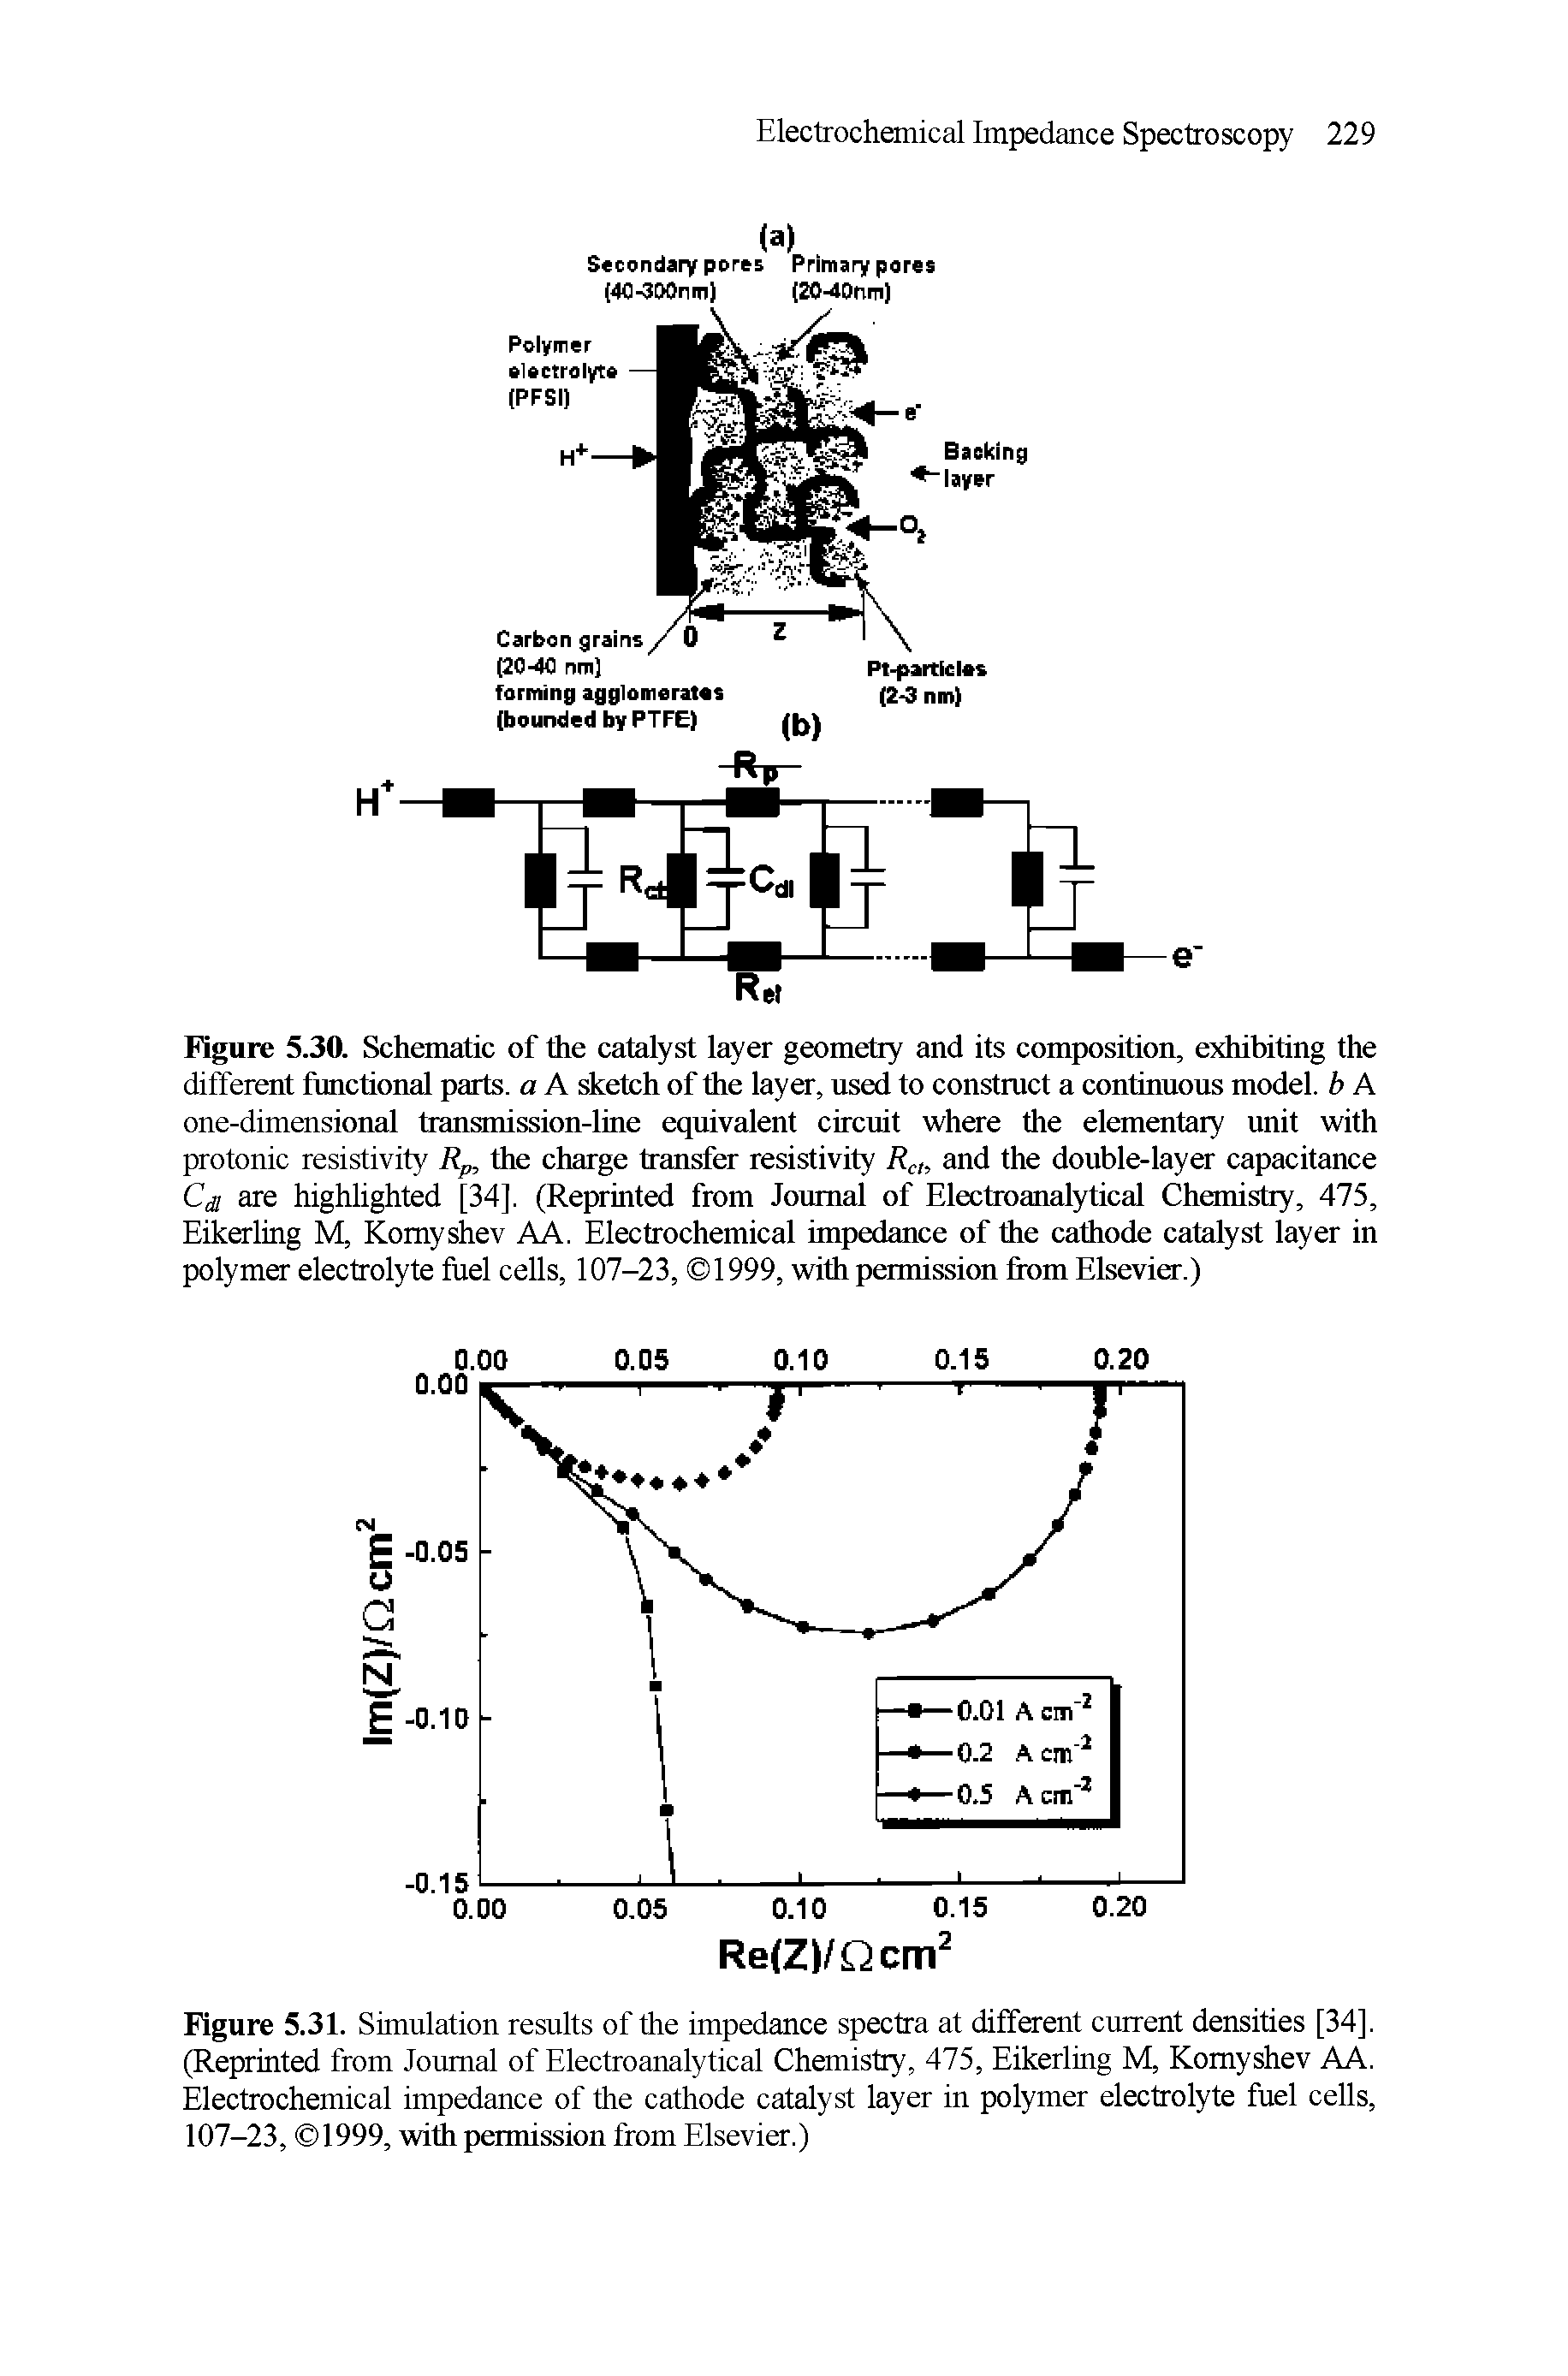 Figure 5.30. Schematic of the catalyst layer geometry and its composition, exhibiting the different functional parts, a A sketch of the layer, used to construct a continuous model, b A one-dimensional transmission-line equivalent circuit where the elementary unit with protonic resistivity Rp, the charge transfer resistivity Rch and the double-layer capacitance Cj are highlighted [34], (Reprinted from Journal of Electroanalytical Chemistry, 475, Eikerling M, Komyshev AA. Electrochemical impedance of the cathode catalyst layer in polymer electrolyte fuel cells, 107-23, 1999, with permission from Elsevier.)...